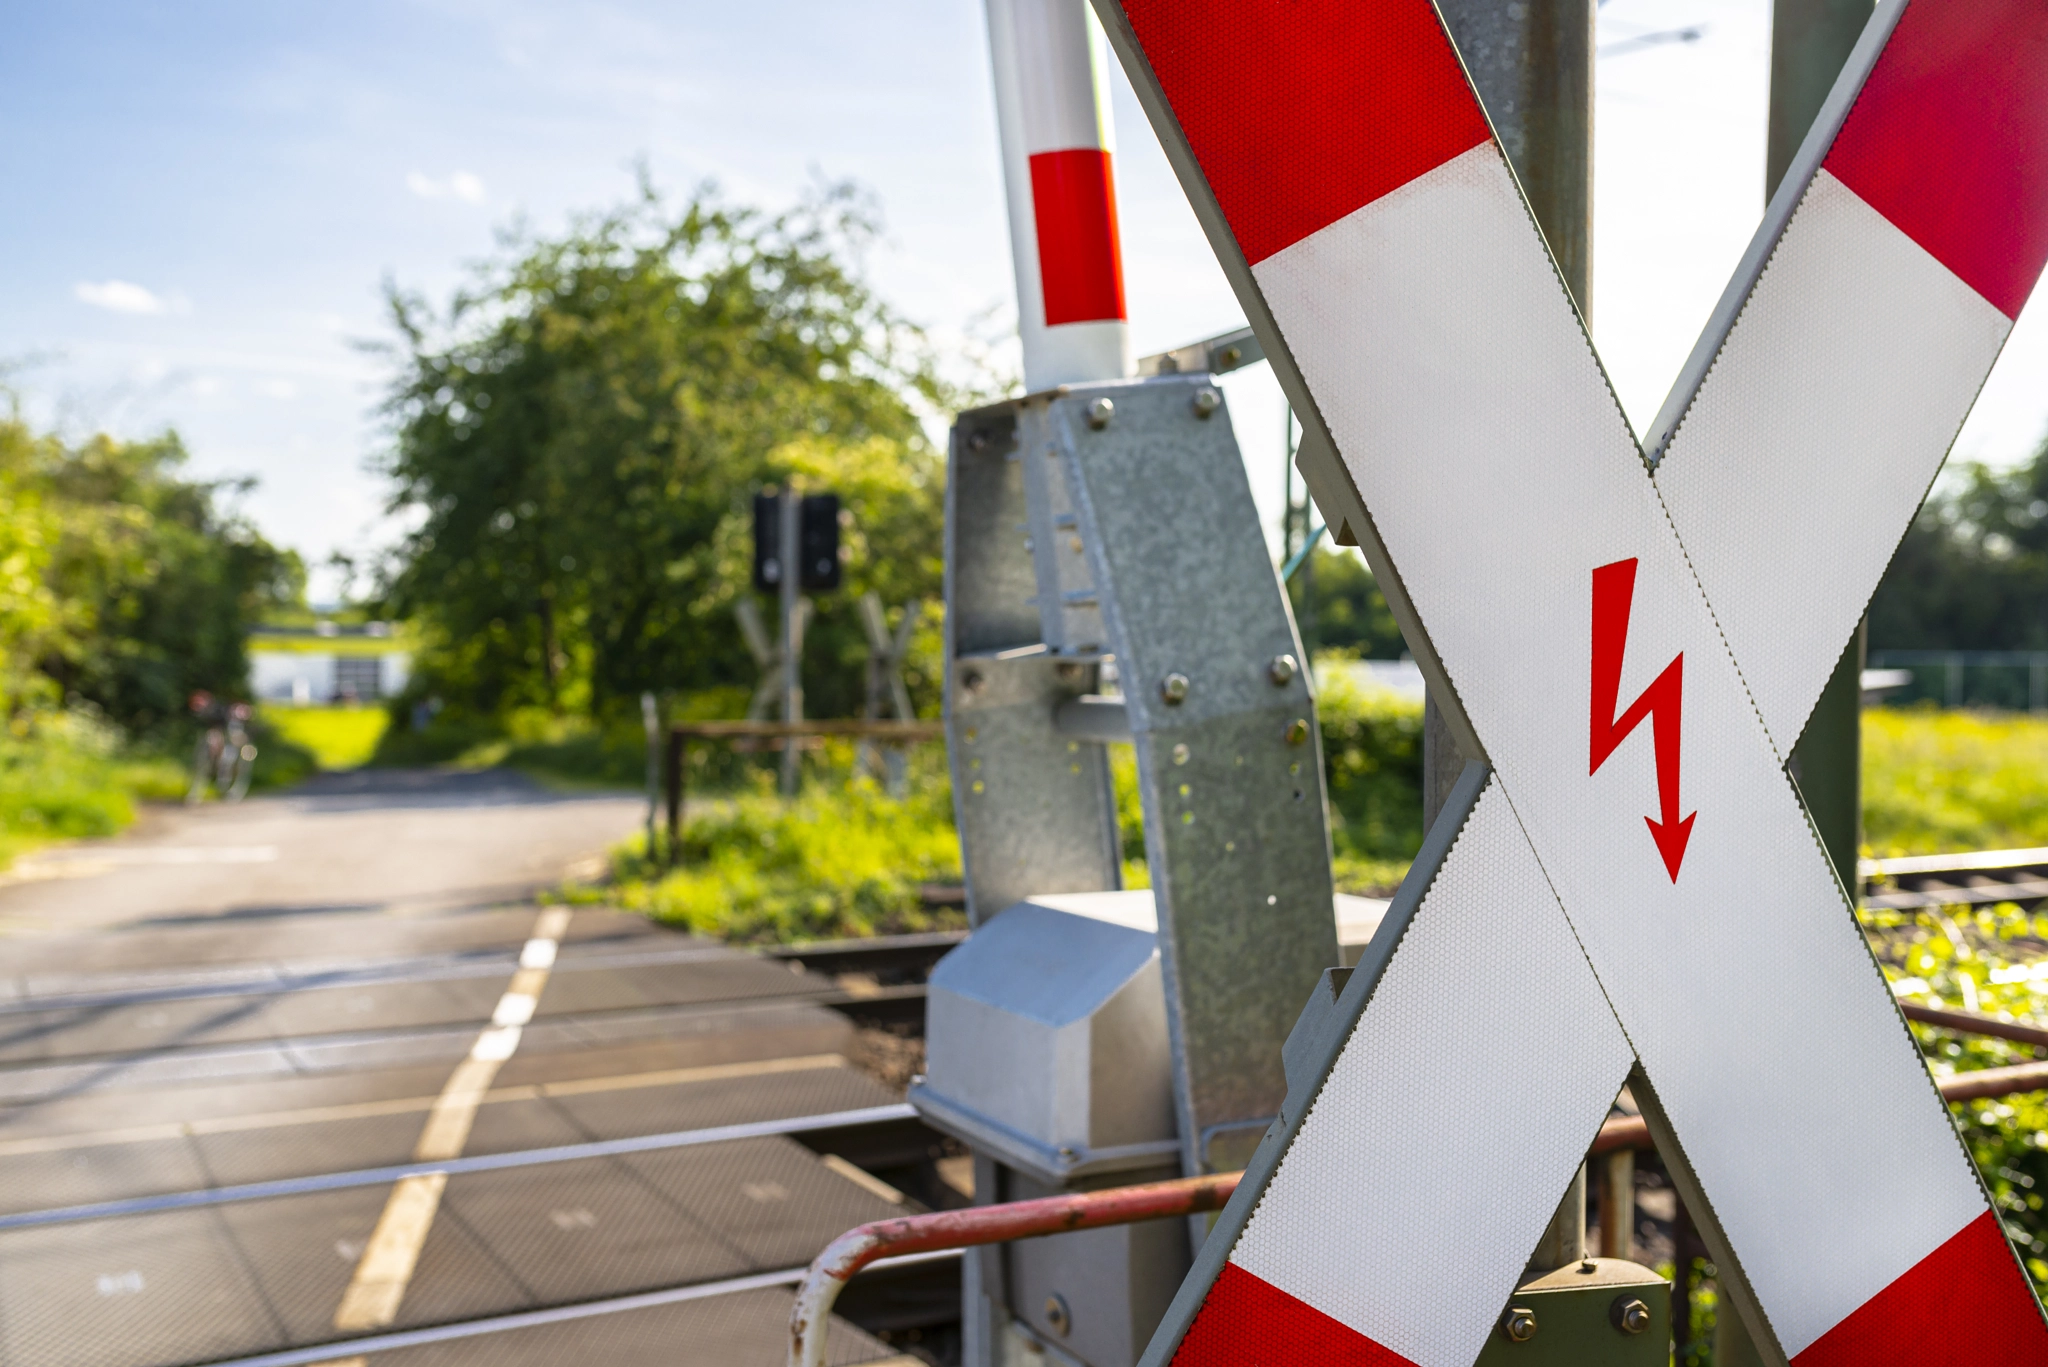 Guarded railroad crossing in the countryside with open barriers.